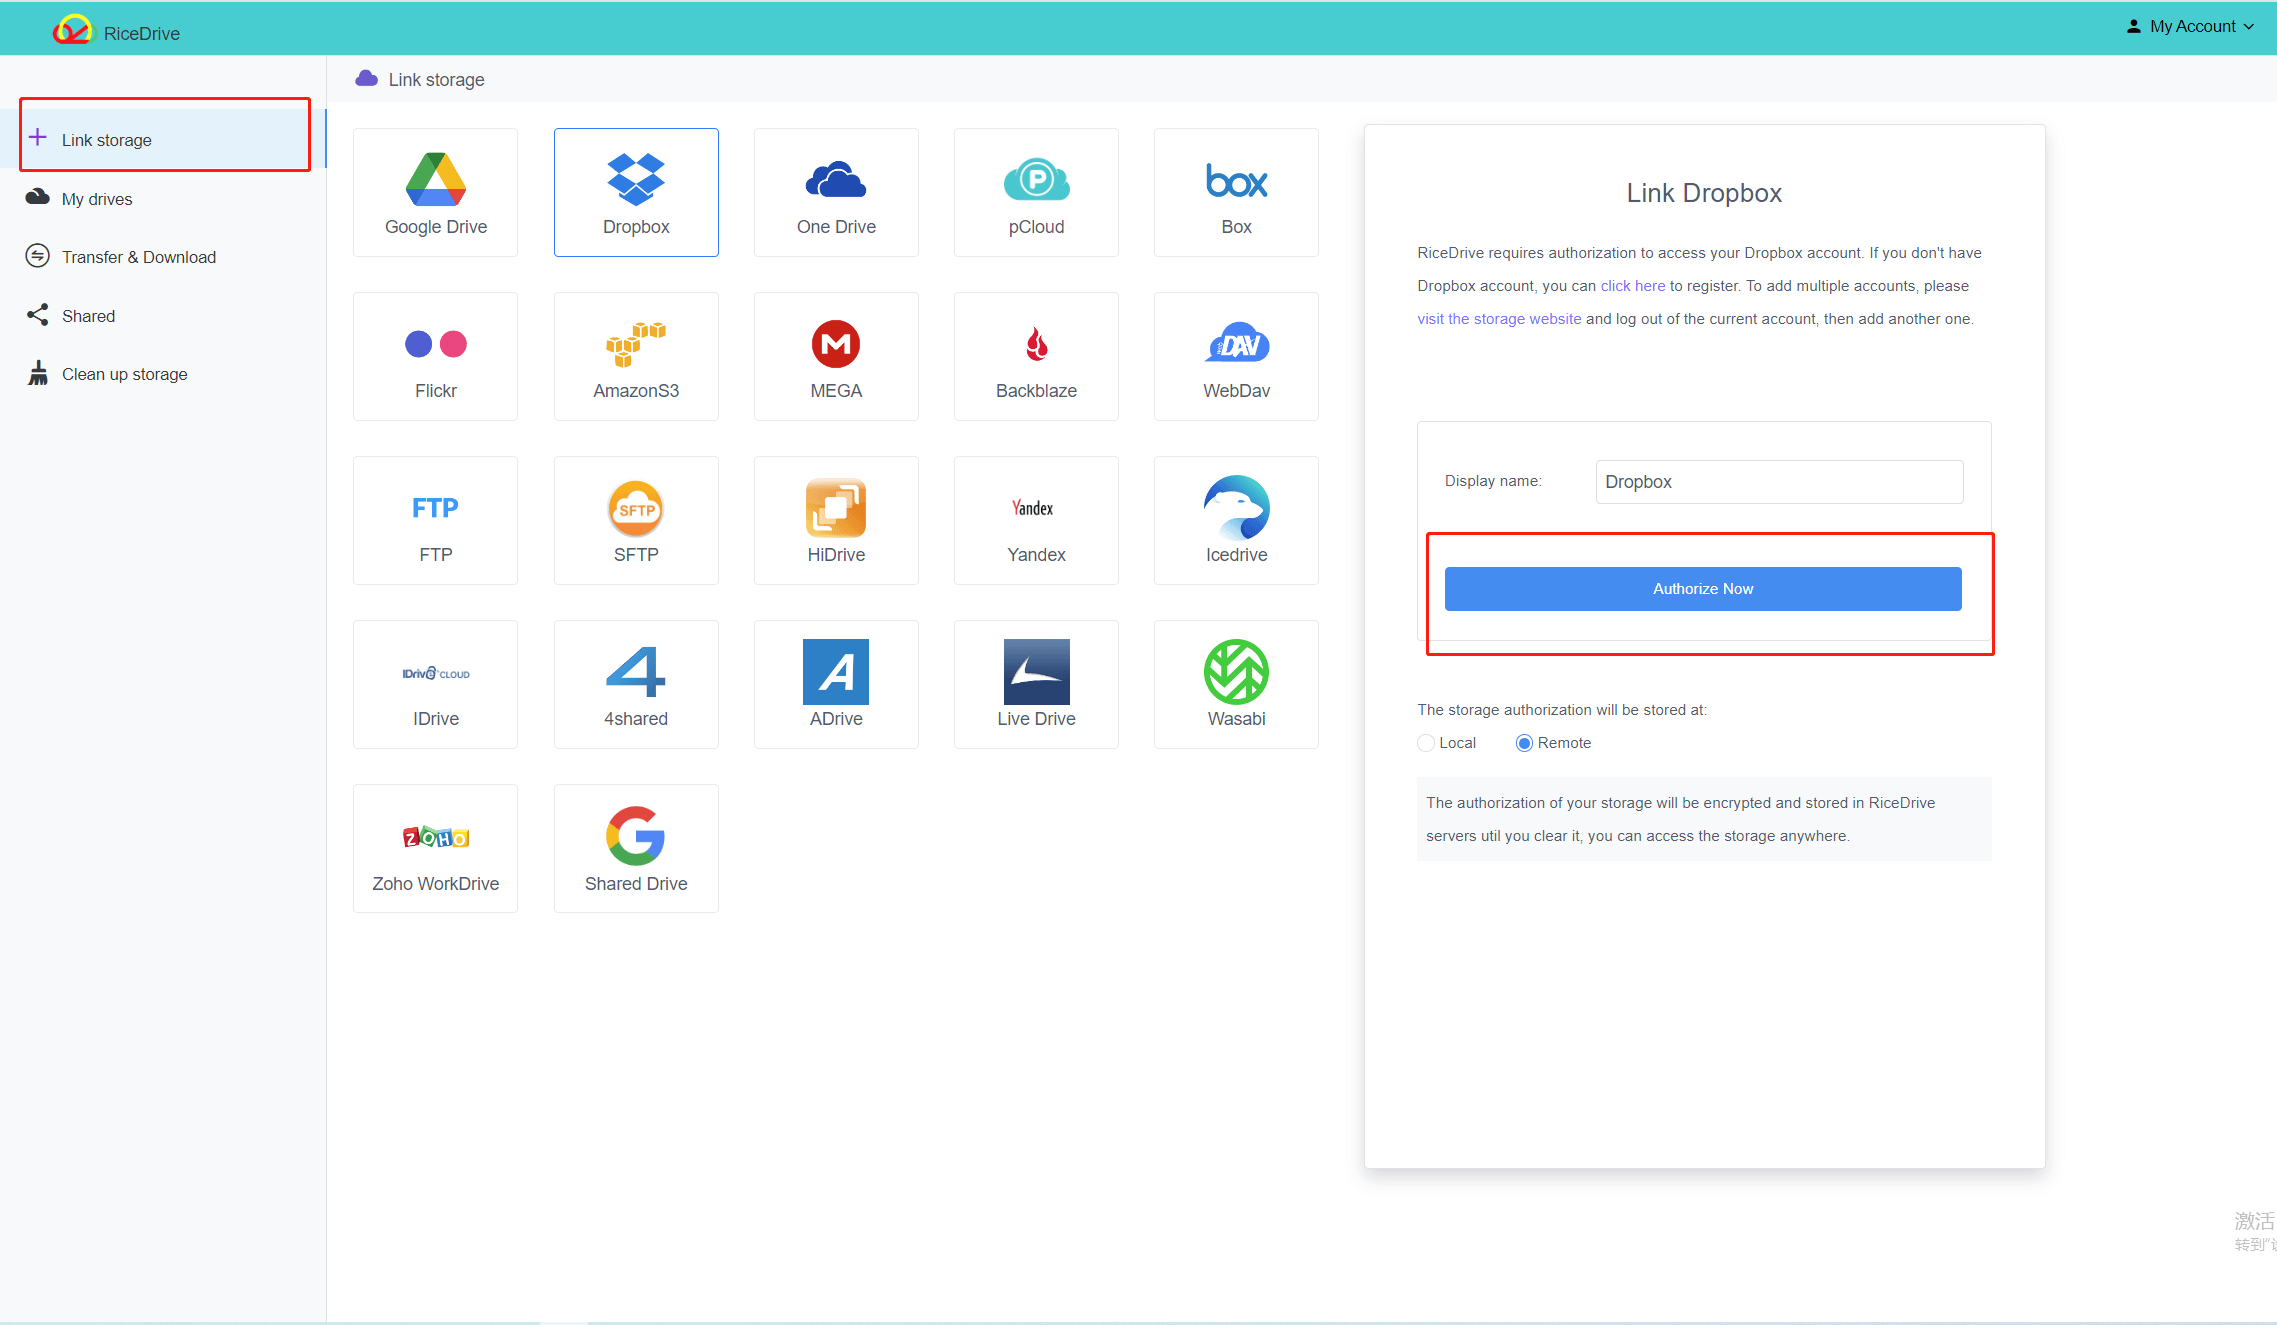 Connect Dropbox to RiceDrive